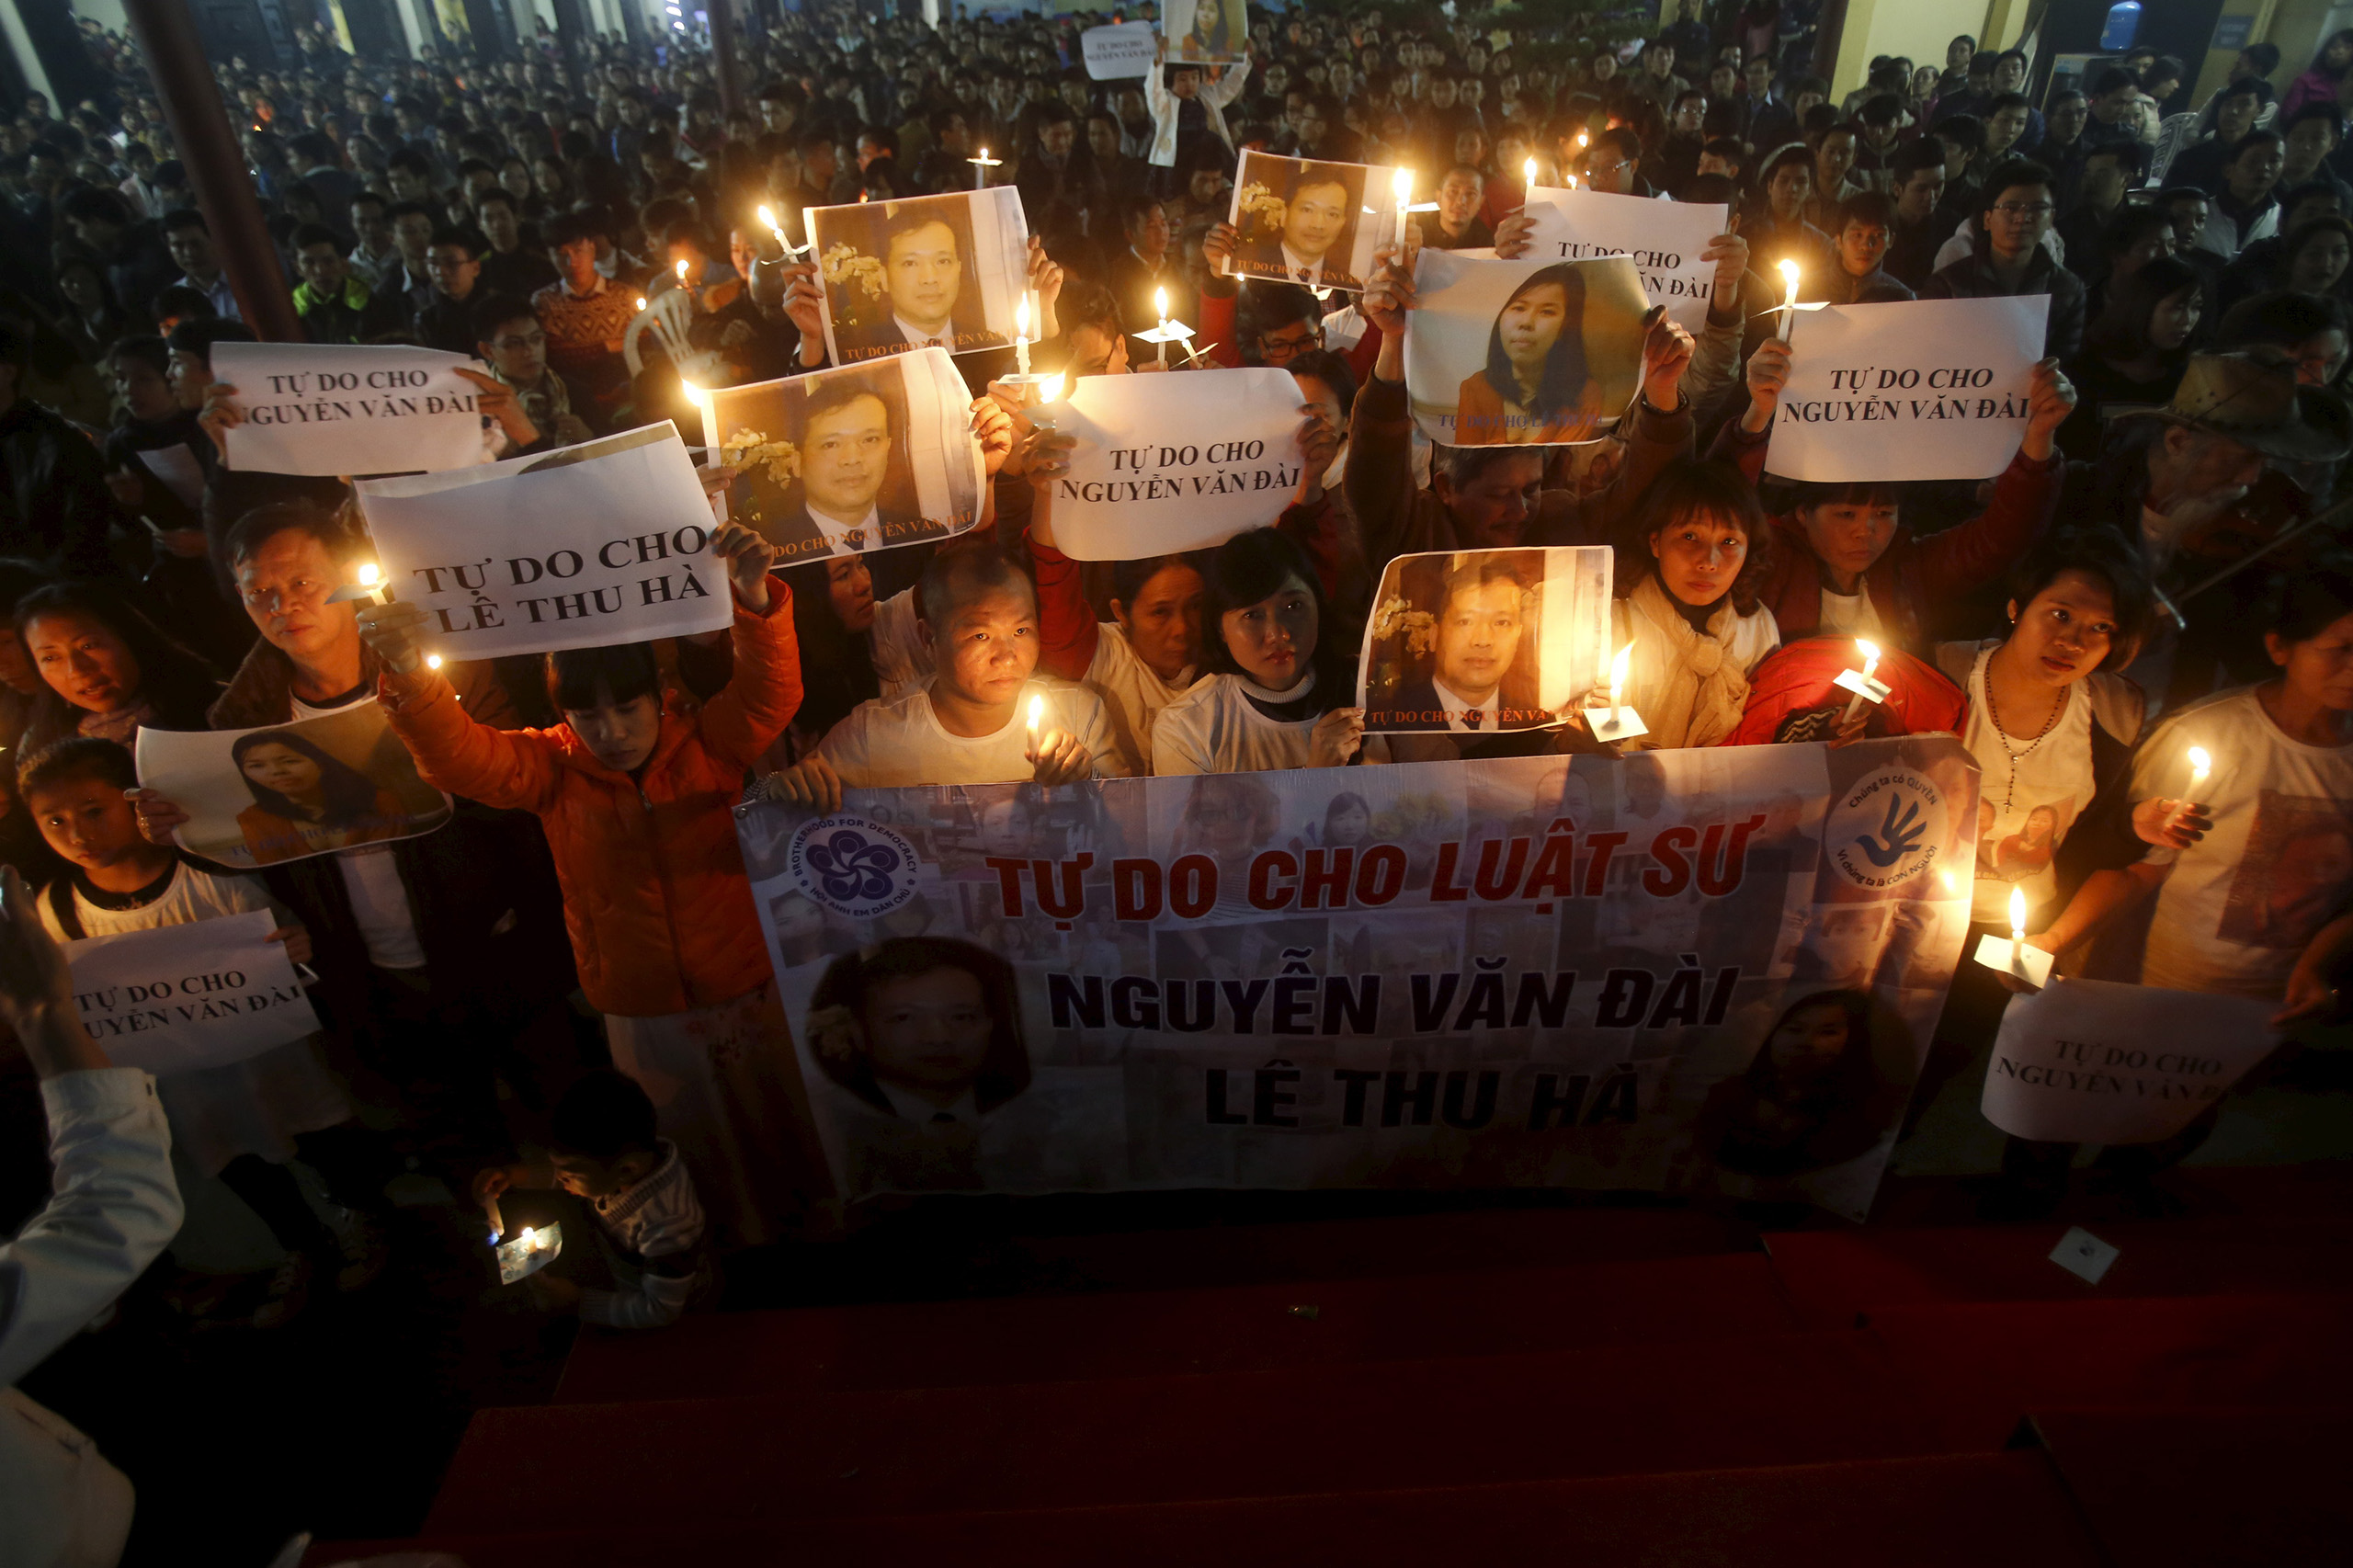 Vu Minh Khanh holds an image of her husband Nguyen Van Dai as Catholics hold candles and image of Dai's assistant Le Thu Ha during a mass prayer for Dai and Ha at Thai Ha church in Hanoi, Dec. 27, 2015. (Nguyen Huy Kham—Reuters)